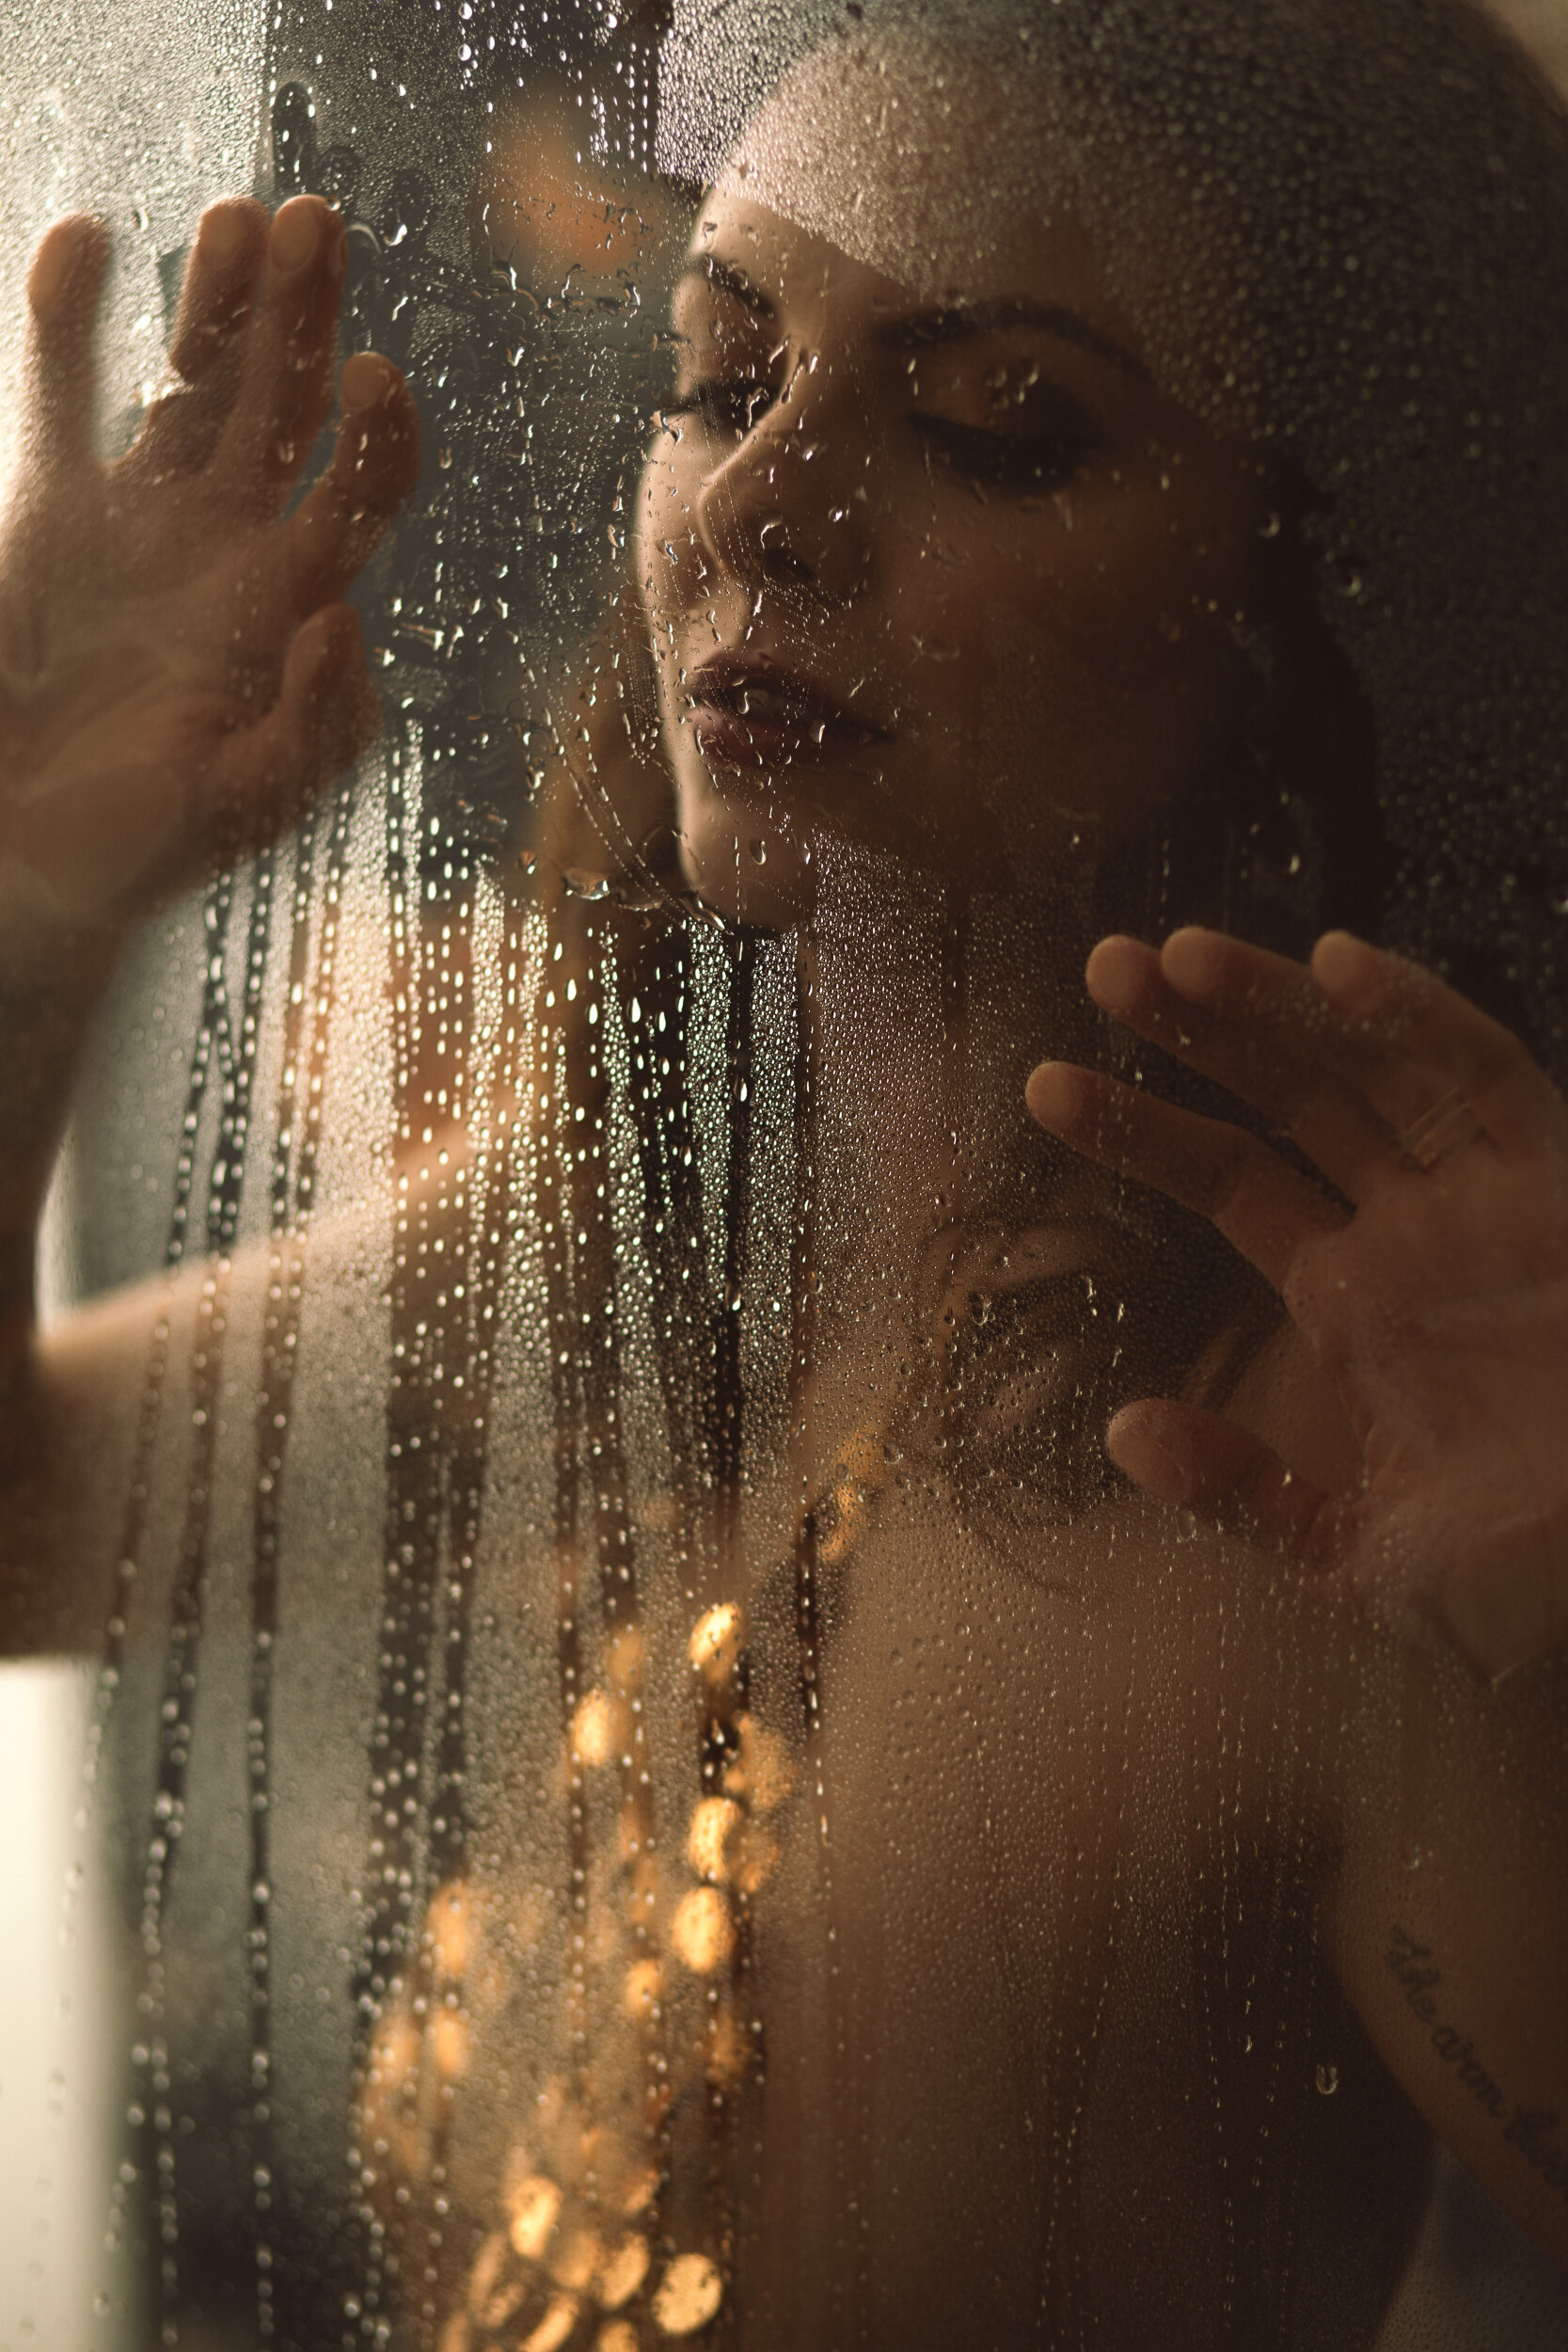 Boudoir photo of a woman in a gold sequin top behind wet shower glass